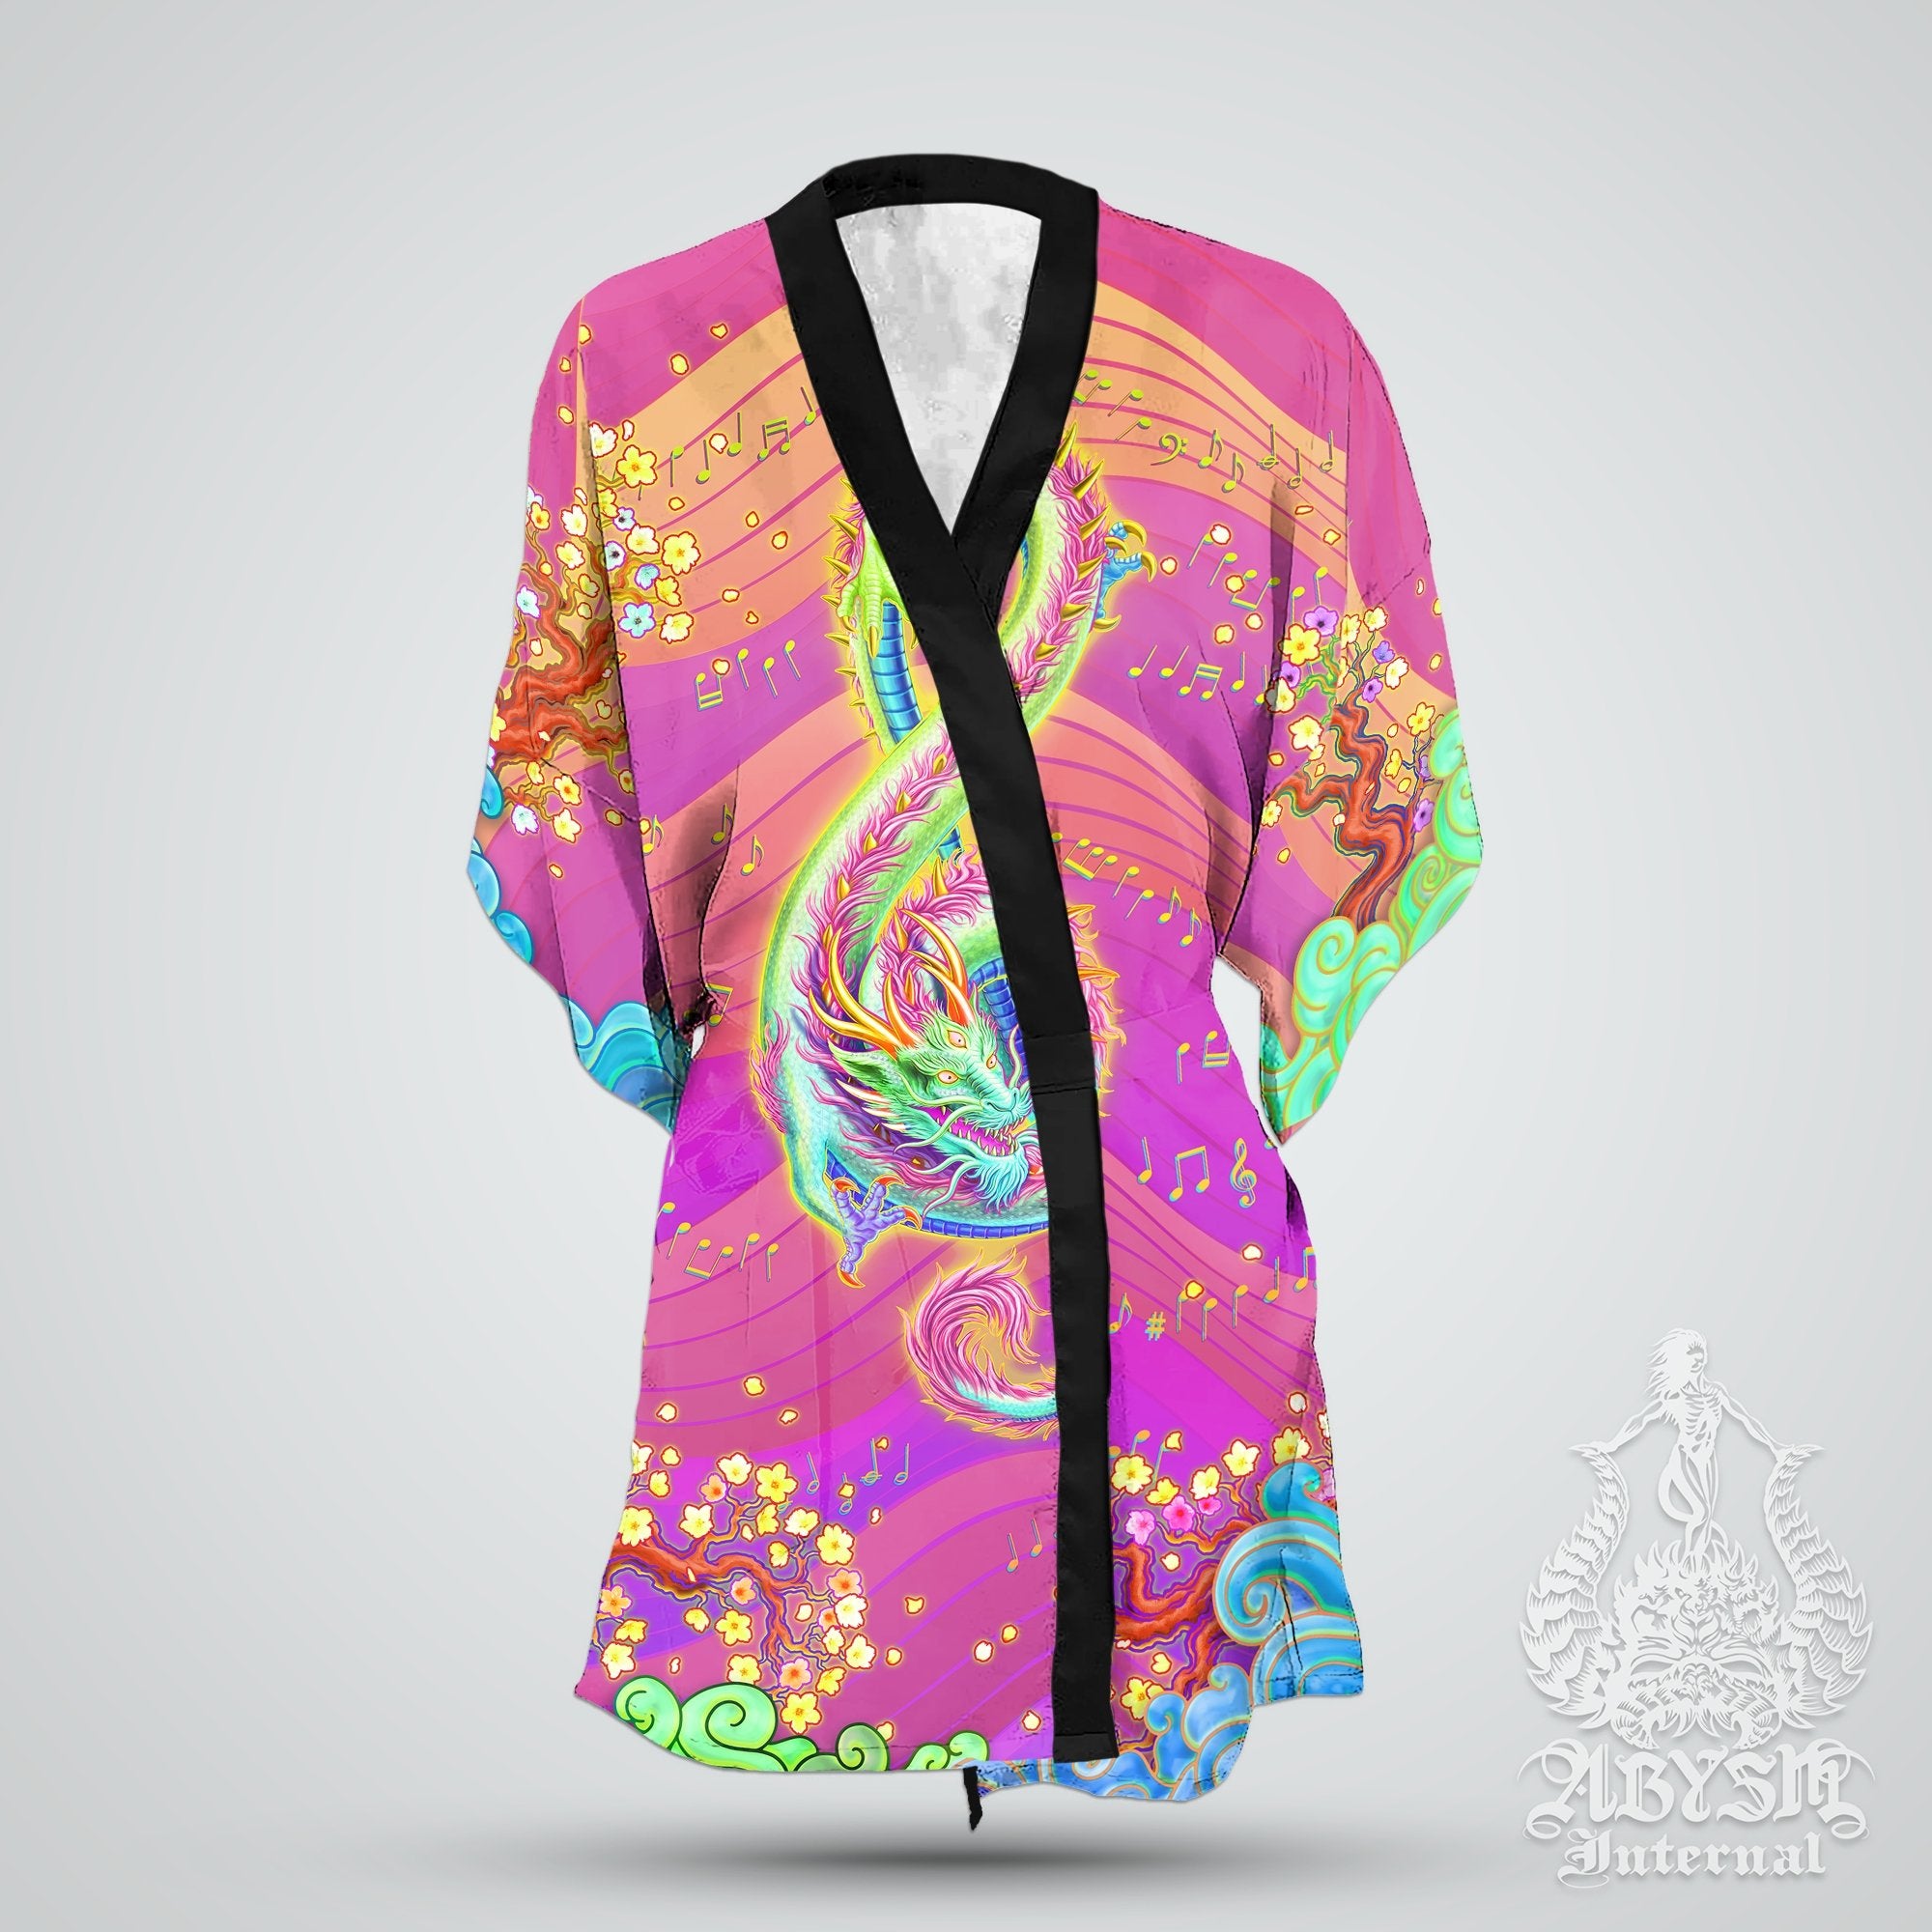 Music Cover Up, Beach Outfit, Party Kimono, Summer Festival Robe, Indie and Alternative Clothing, Unisex - Dragon, Psy Neon - Abysm Internal